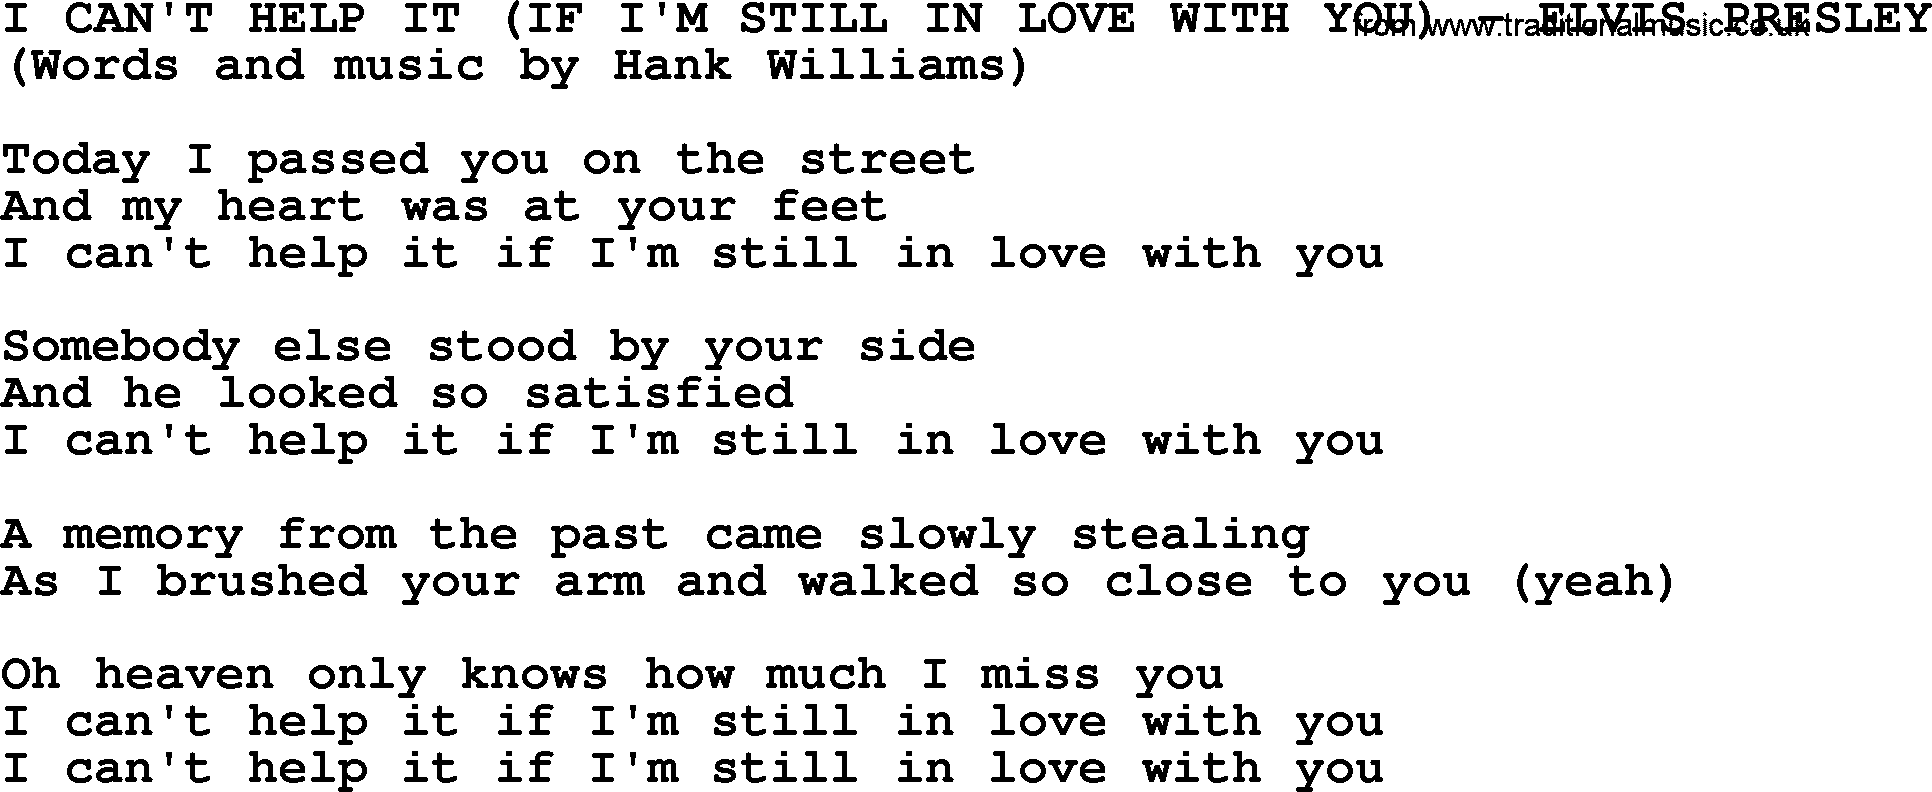 Elvis Presley song: I Can't Help It (If I'm Still In Love With You) lyrics